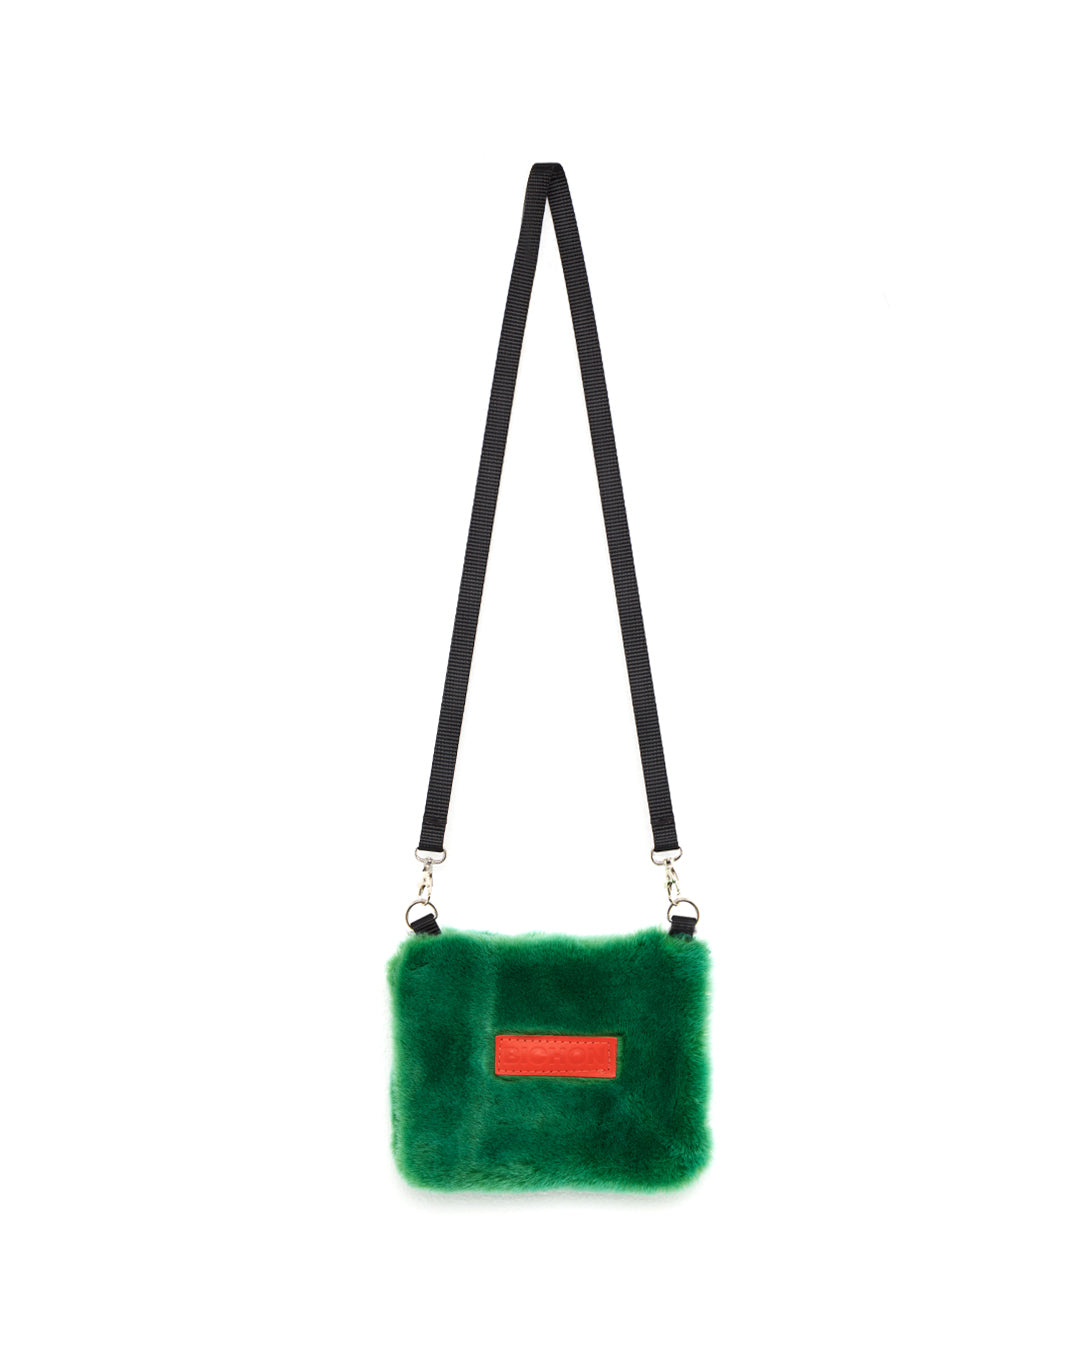 Fluffy green crossbody bag made from shearling fabric by Australian independent designer, Bichon. Handmade bag available at Melbourne clothing boutique Error 404 store